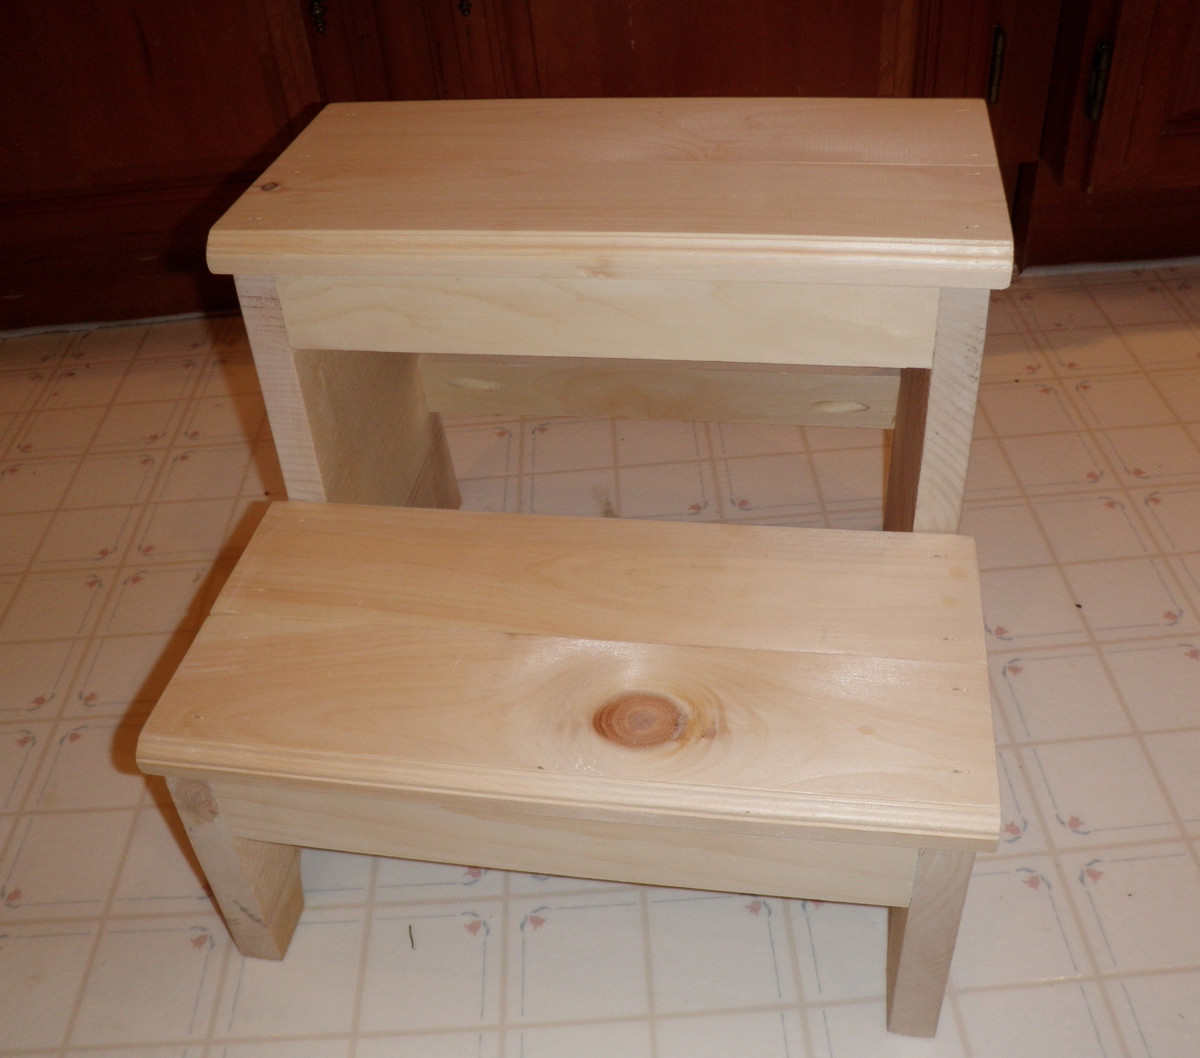  Building A Step Stool  Check it out now 